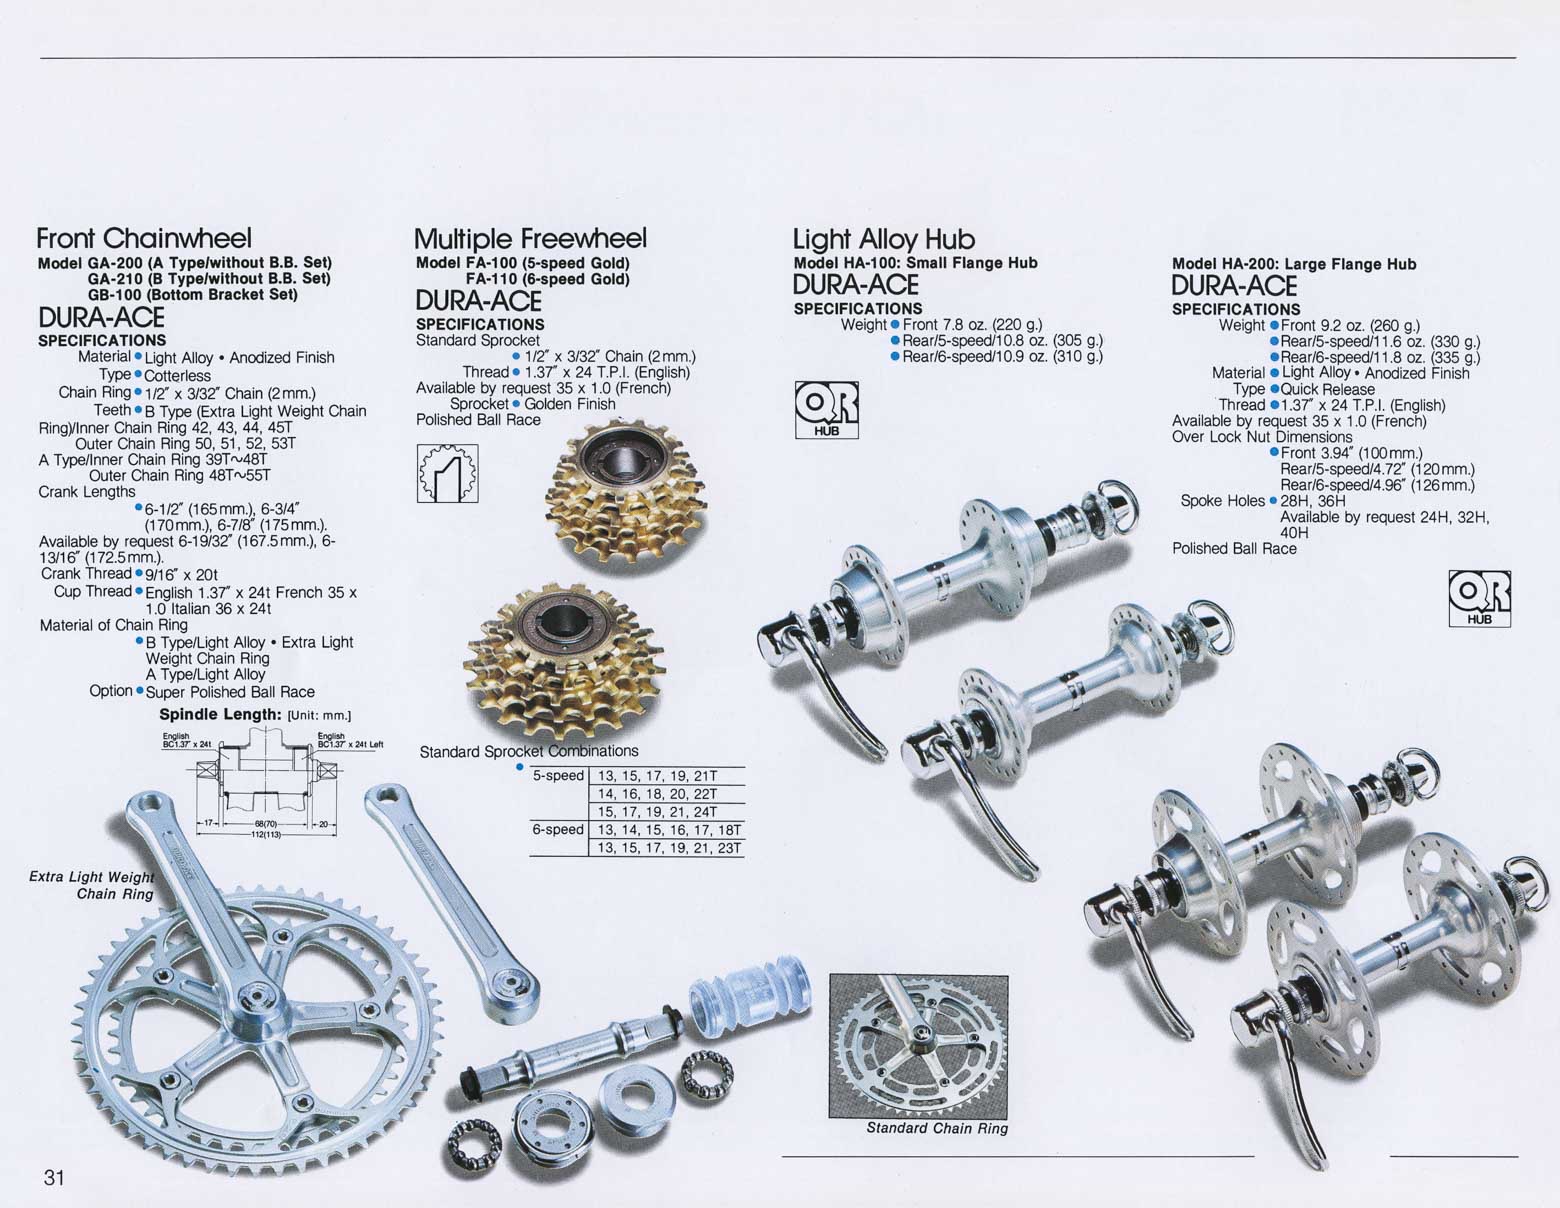 Shimano Bicycle System Components (December 1978) page 31 main image